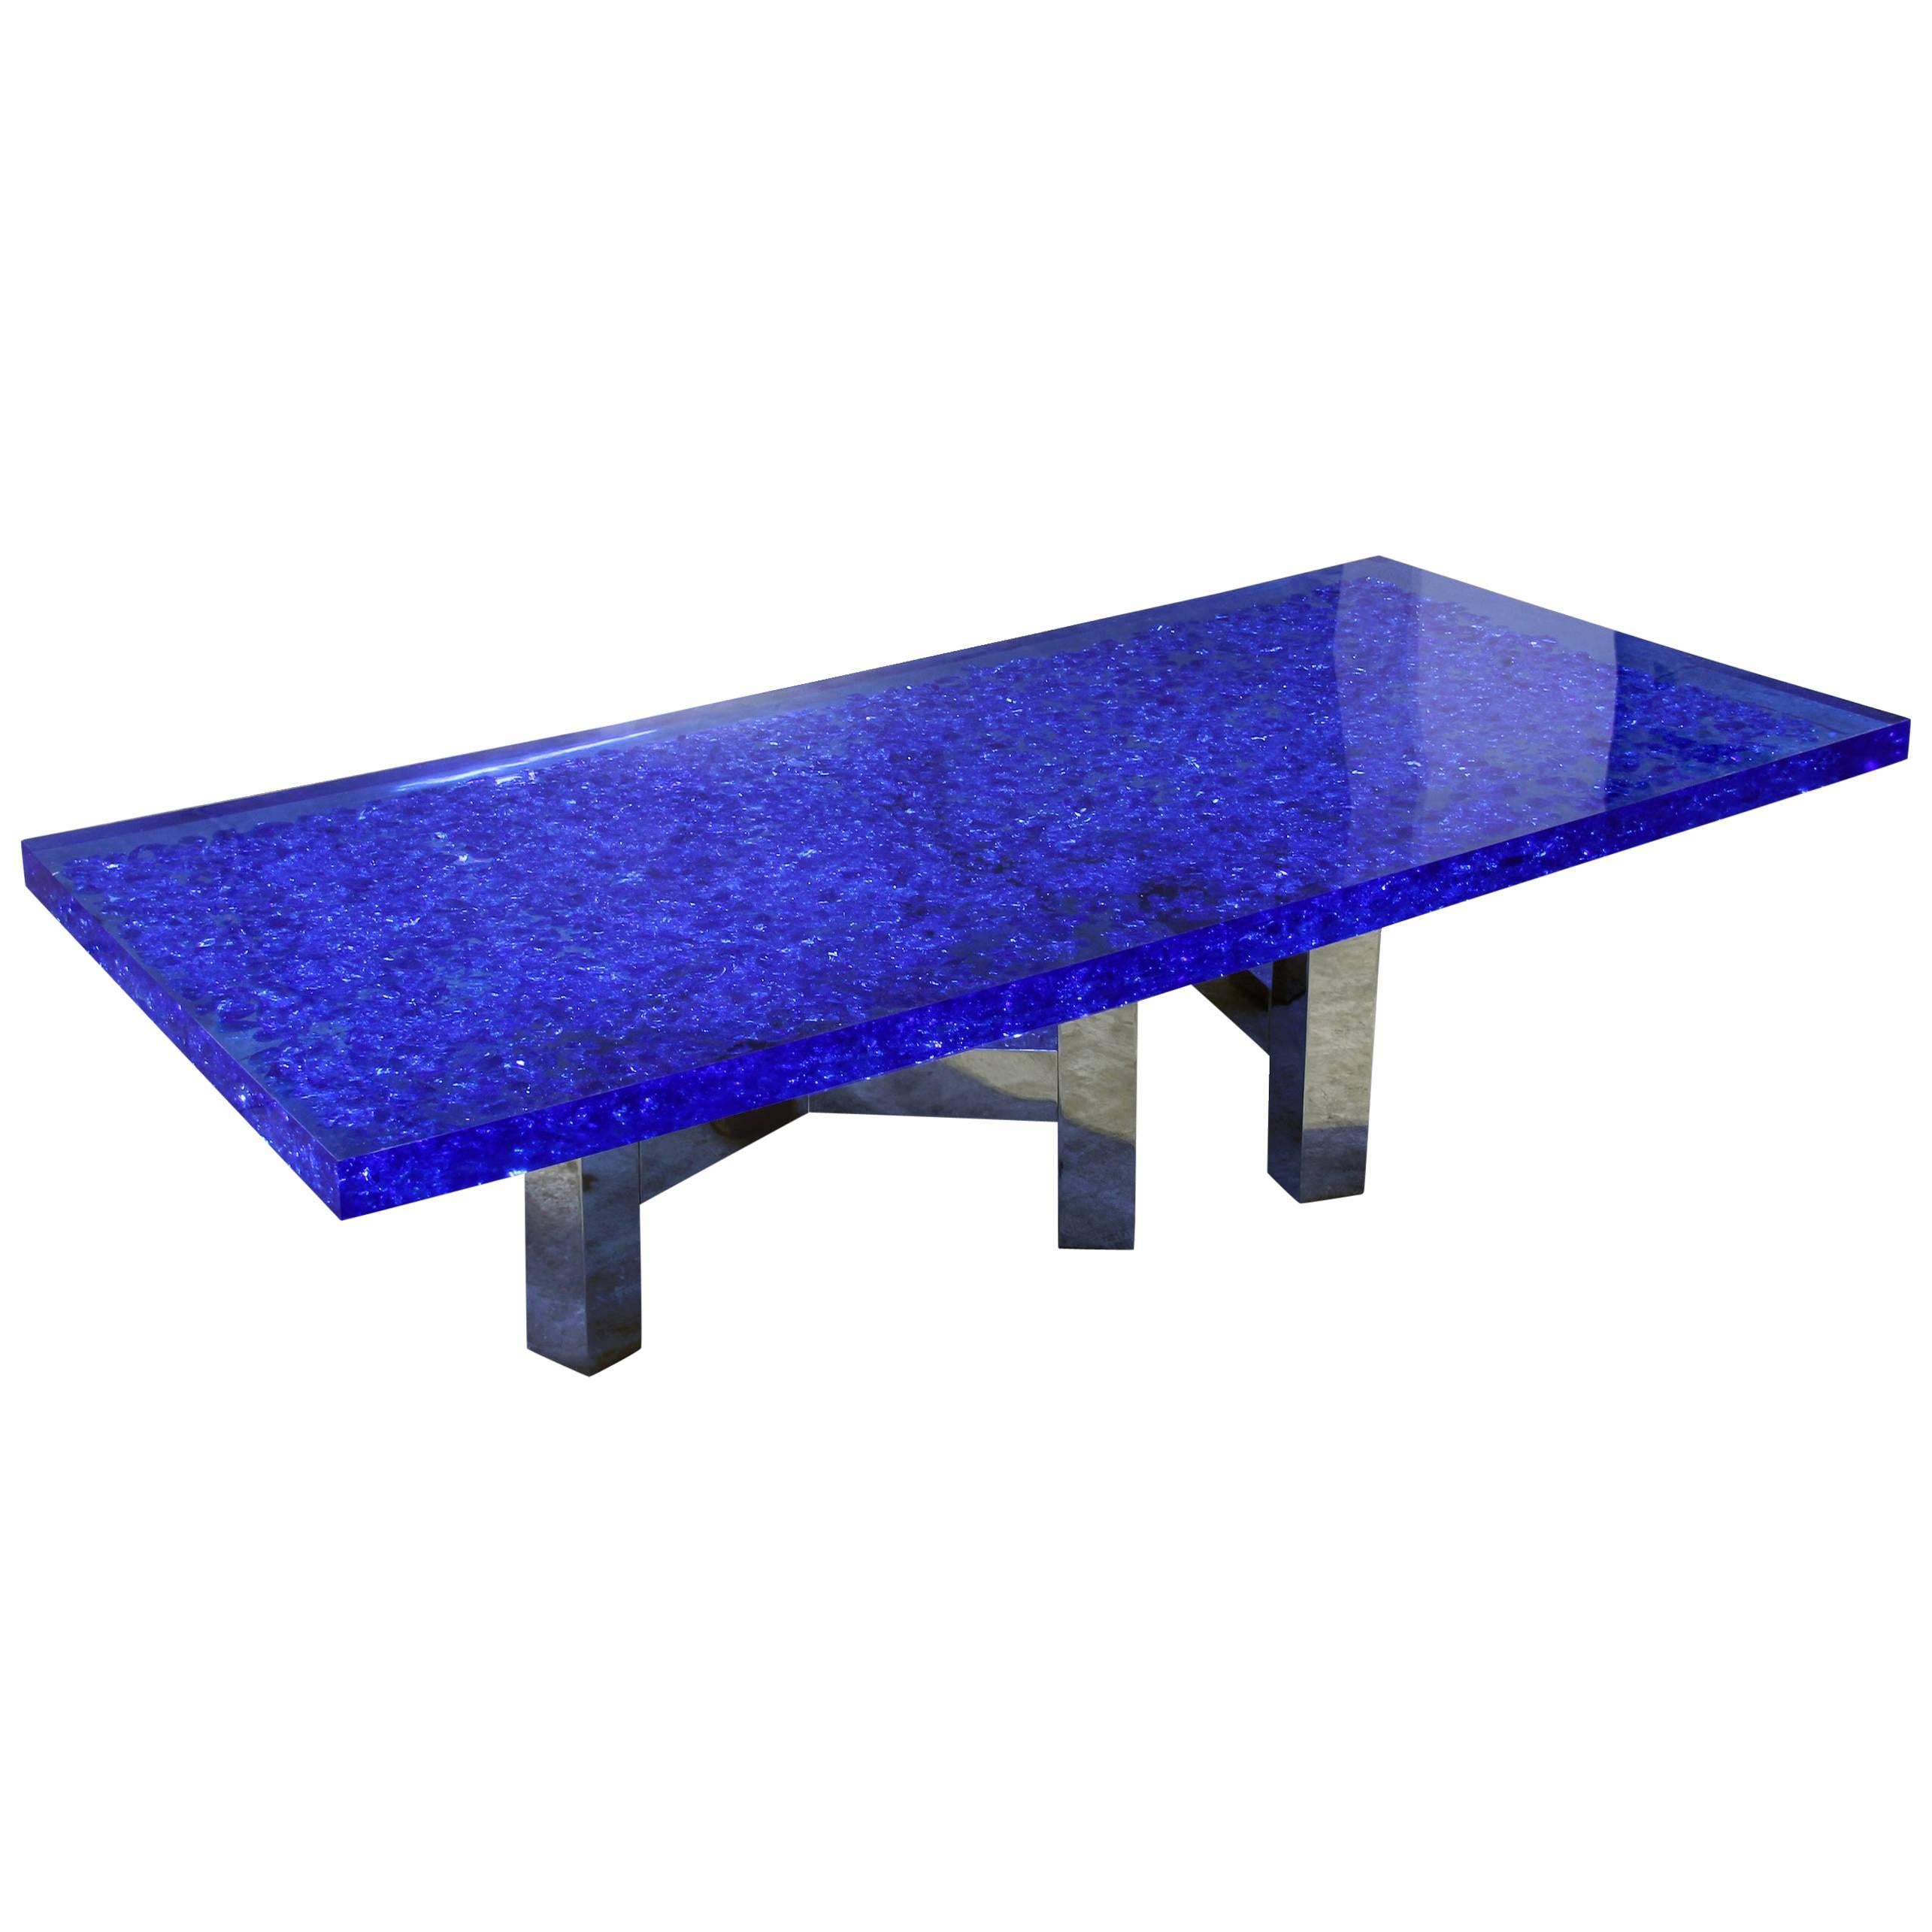 Blue Lucite and Murano Glass Table Nickel-Plated Brass Base "Riflessioni" For Sale